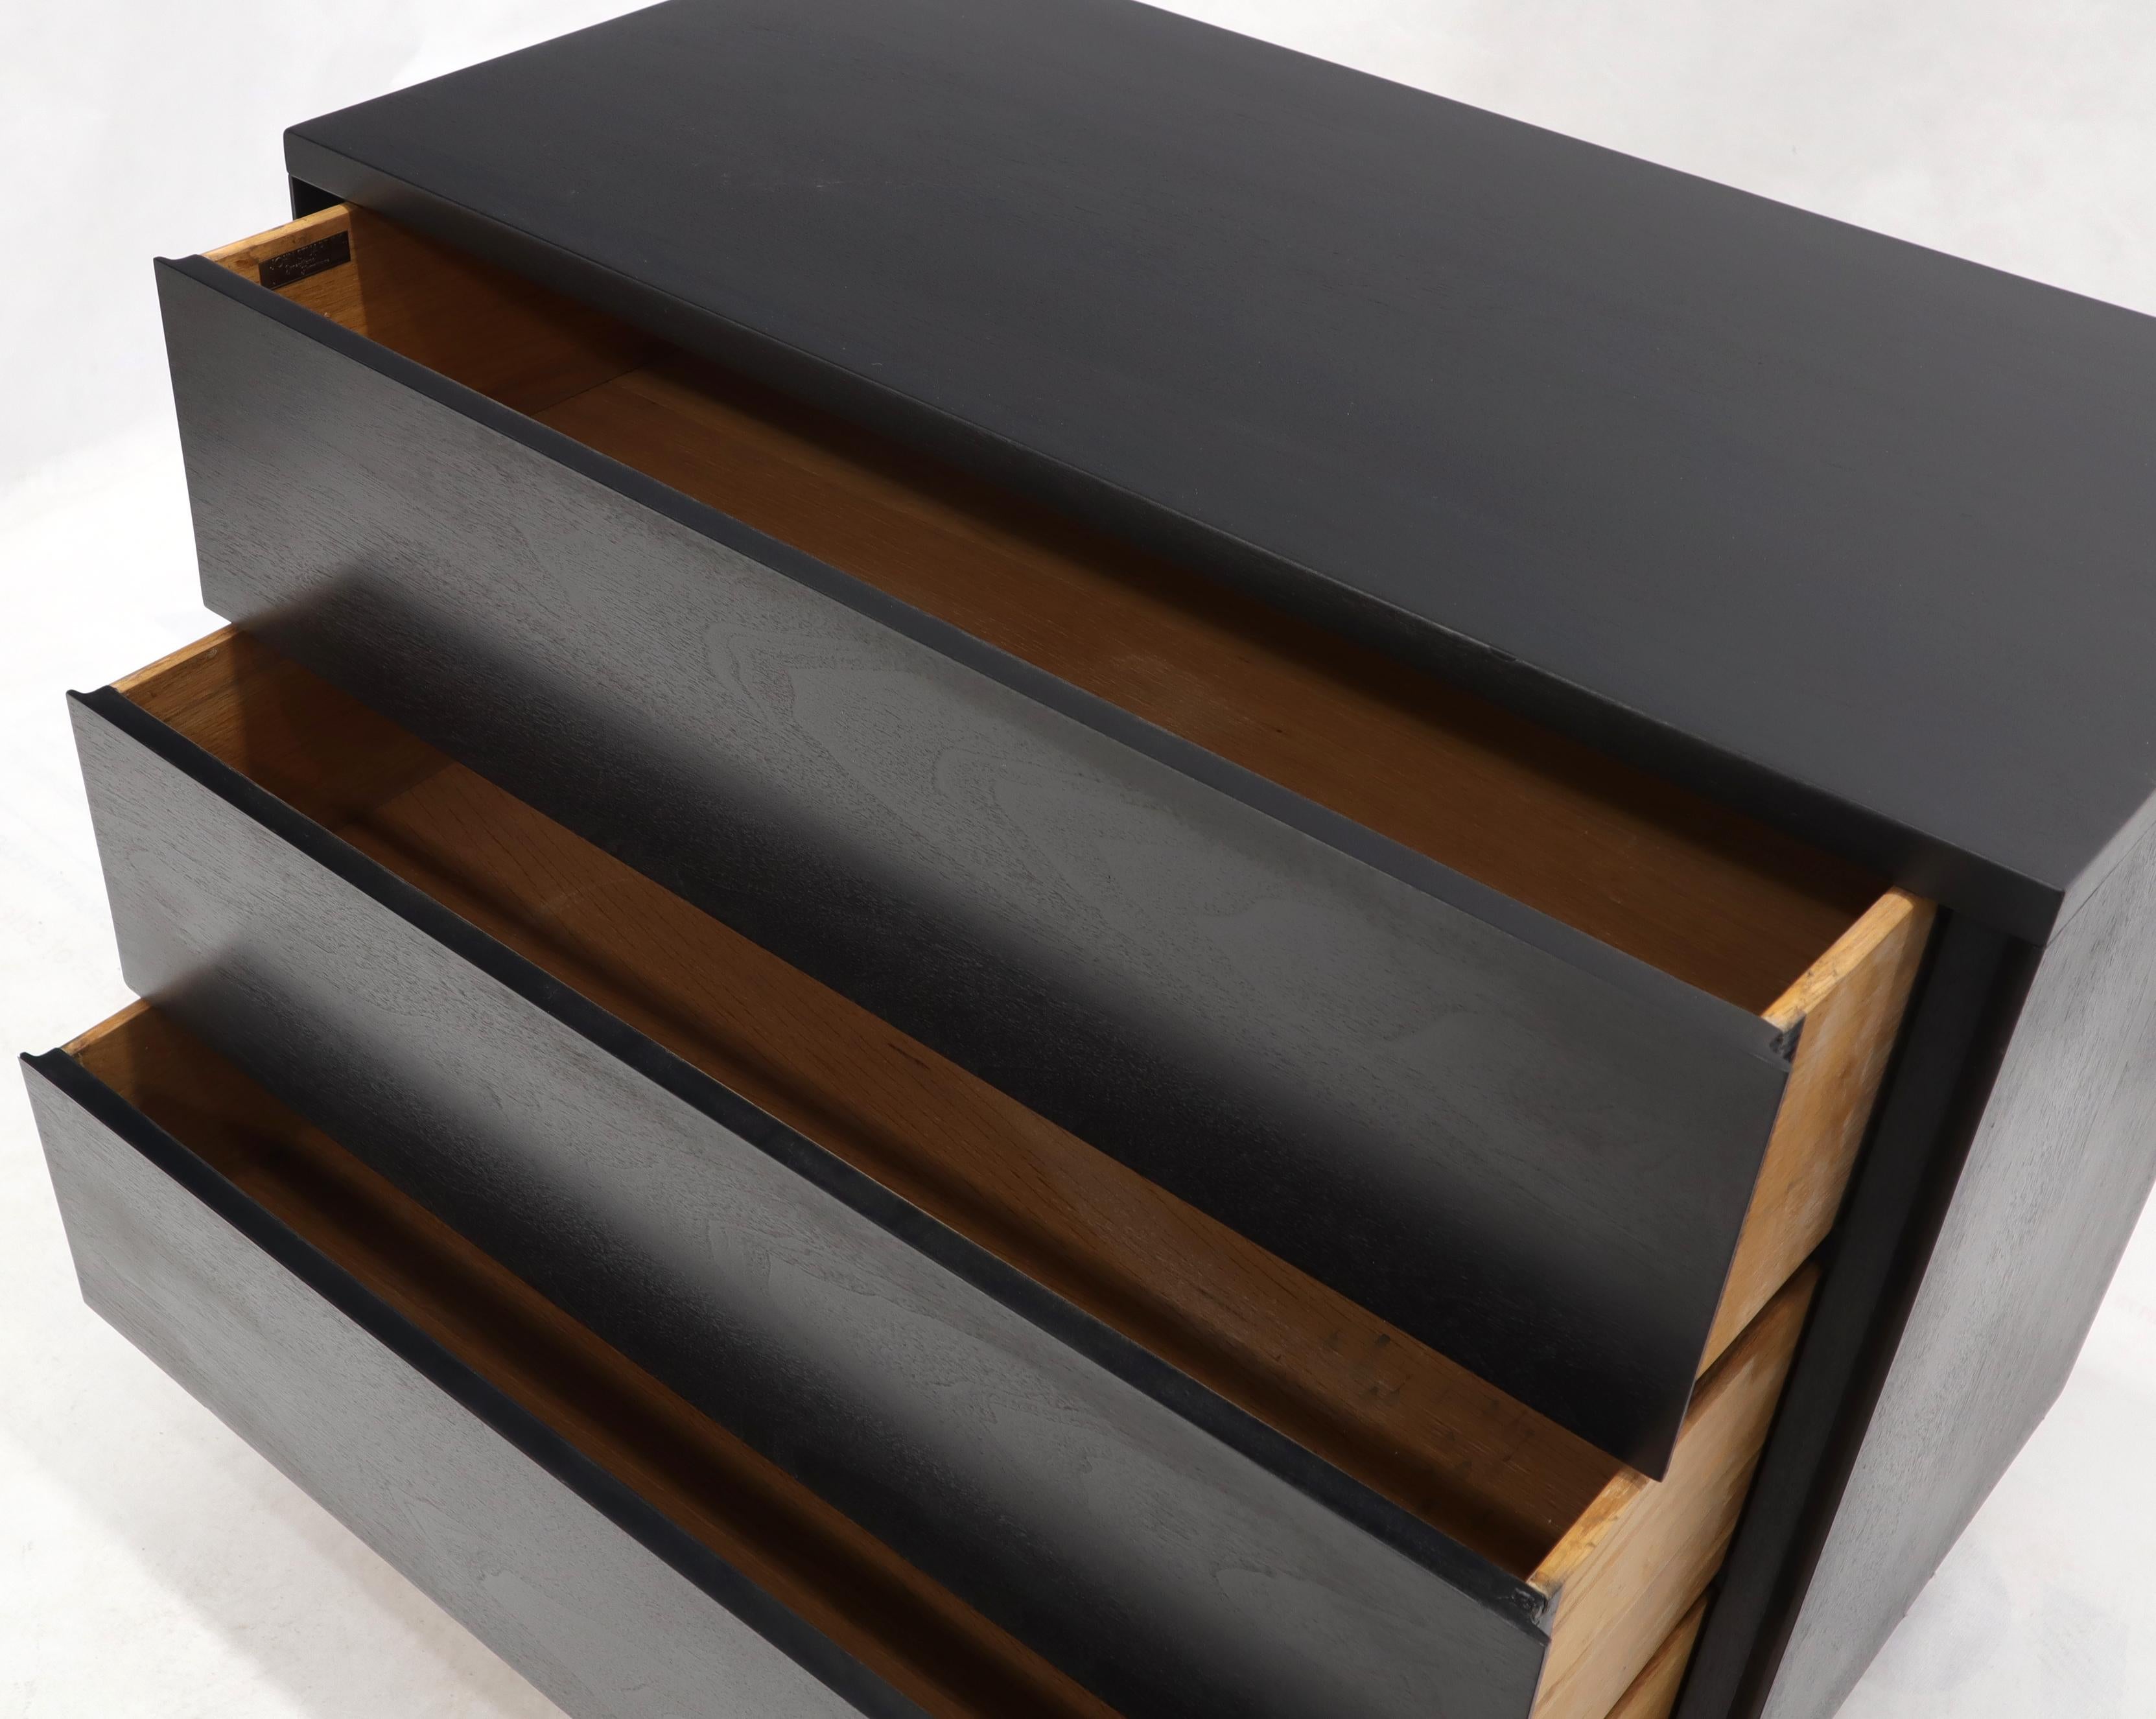 Pair of Black Lacquer Mahogany Mid-Century Modern Bachelor Chests For Sale 3